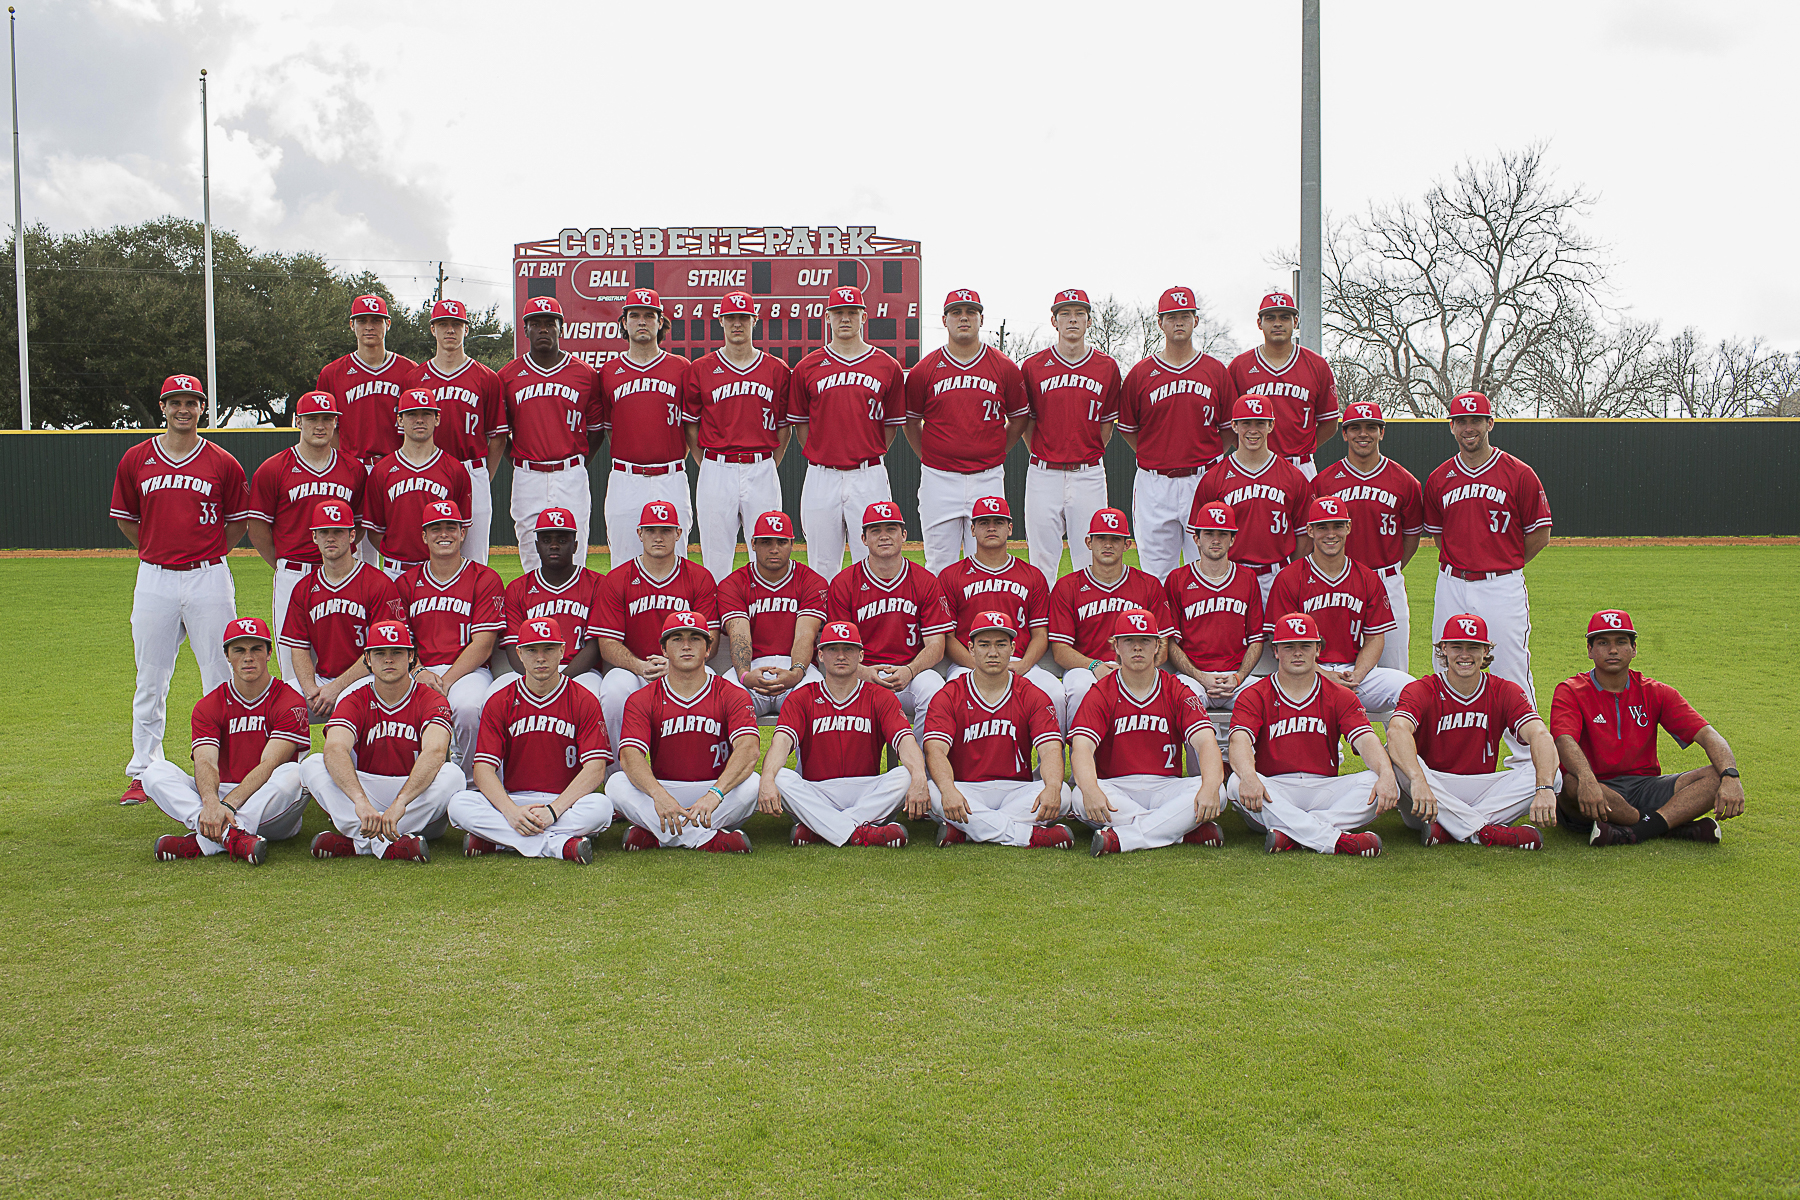 THE RIGHT DIRECTION - Pioneers Baseball Team set for competitive 2020 season